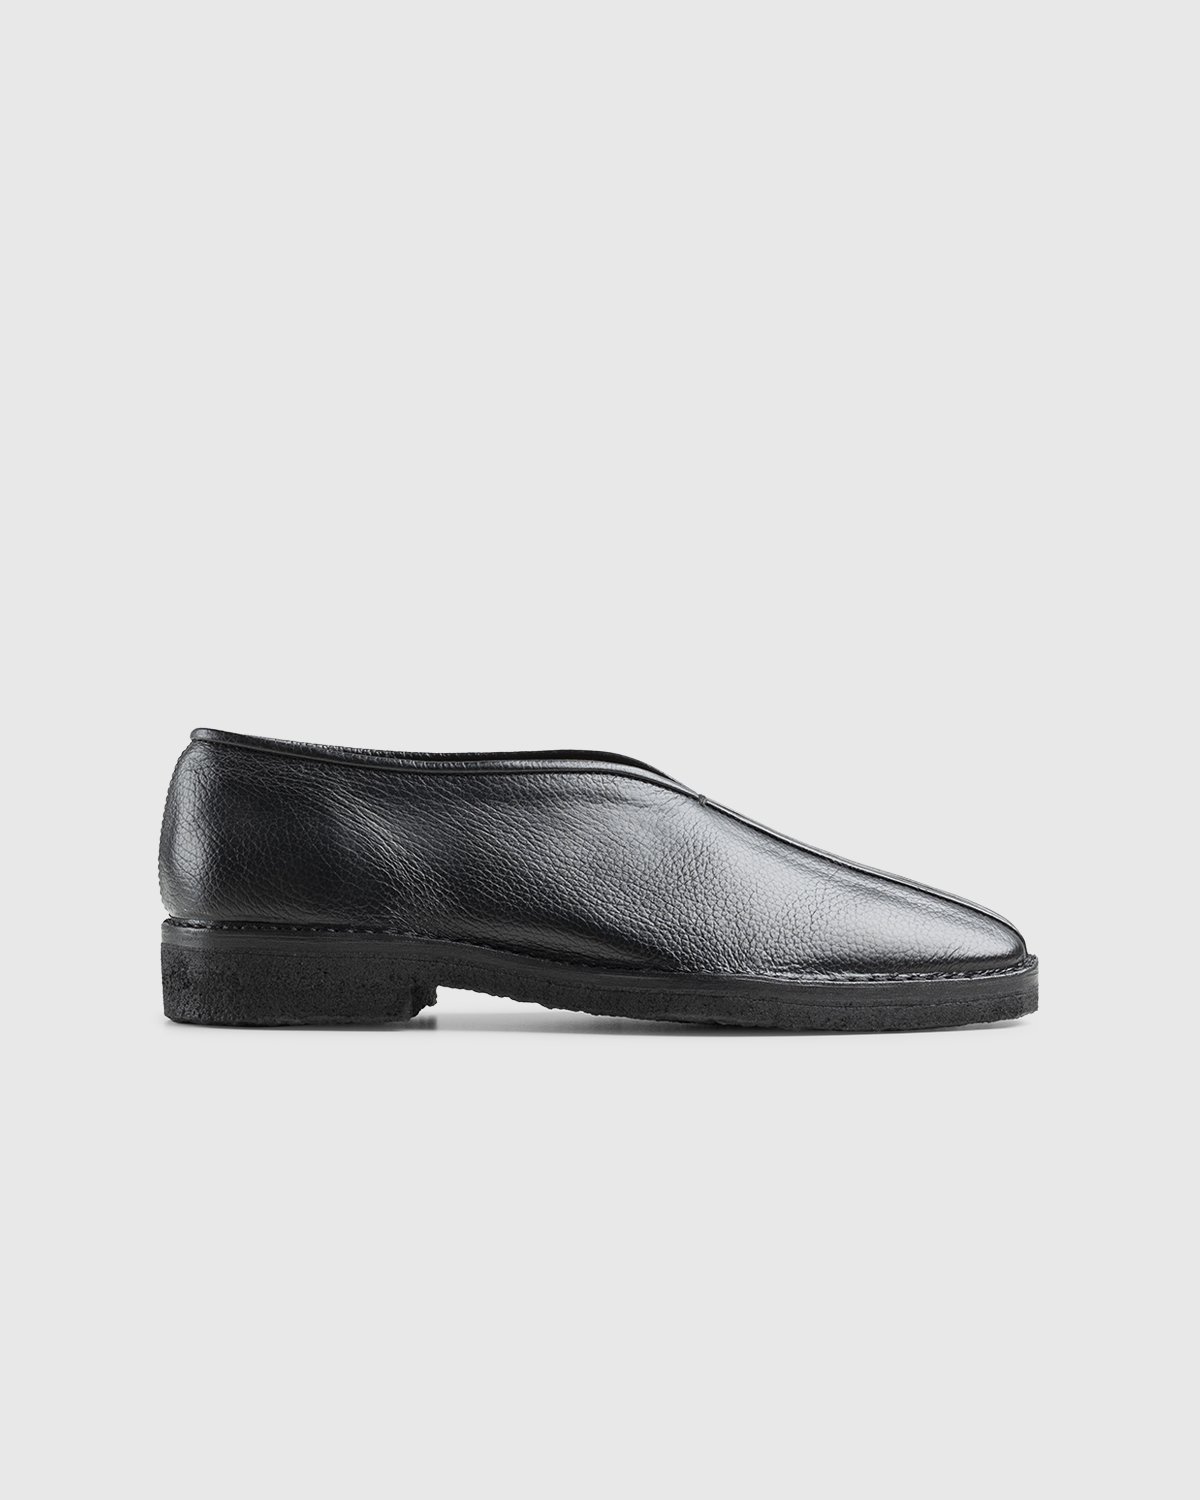 Lemaire - Leather Chinese Slippers Black - Footwear - Black - Image 1